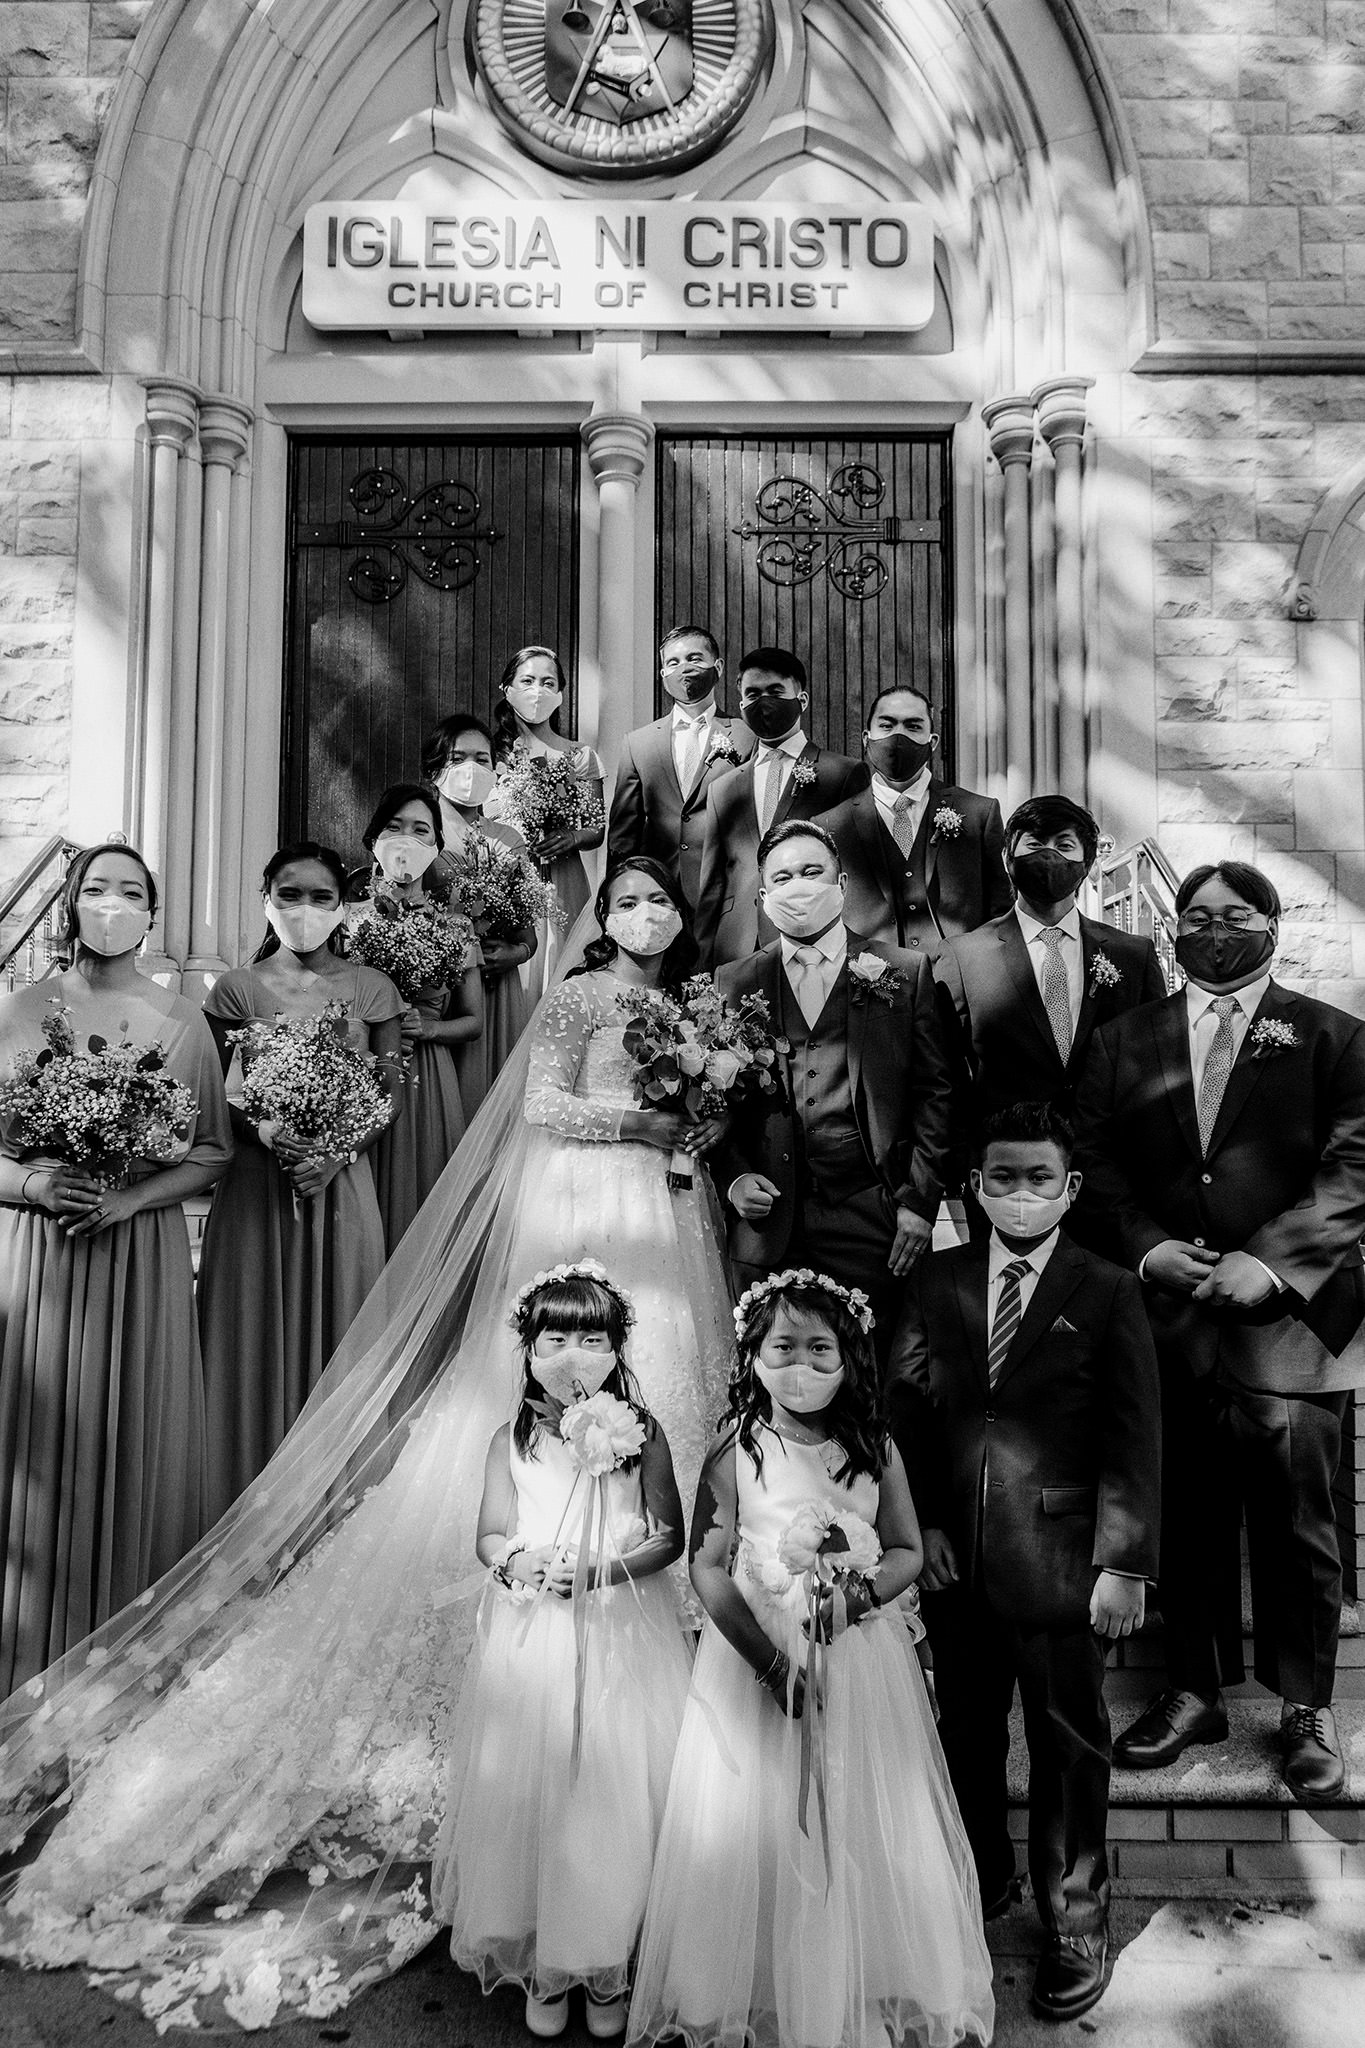 Entire wedding party in front of church steps with masks on during COVID19 pandemic.